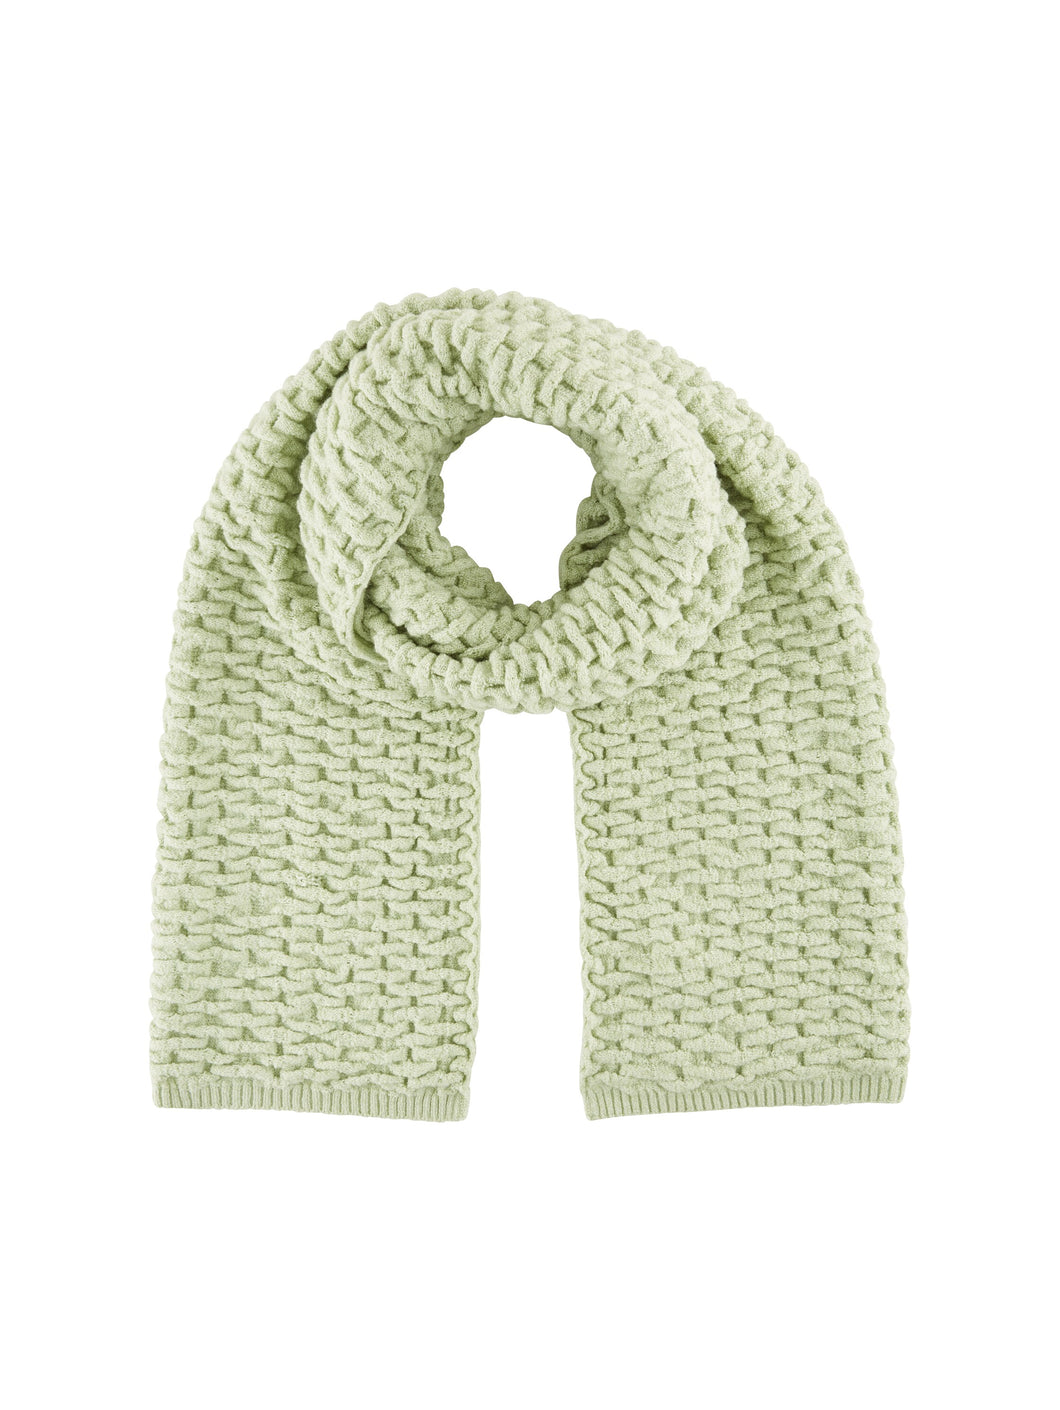 TOM TAILOR DENIM 3D STRUCTURED SCARF dusty pear green